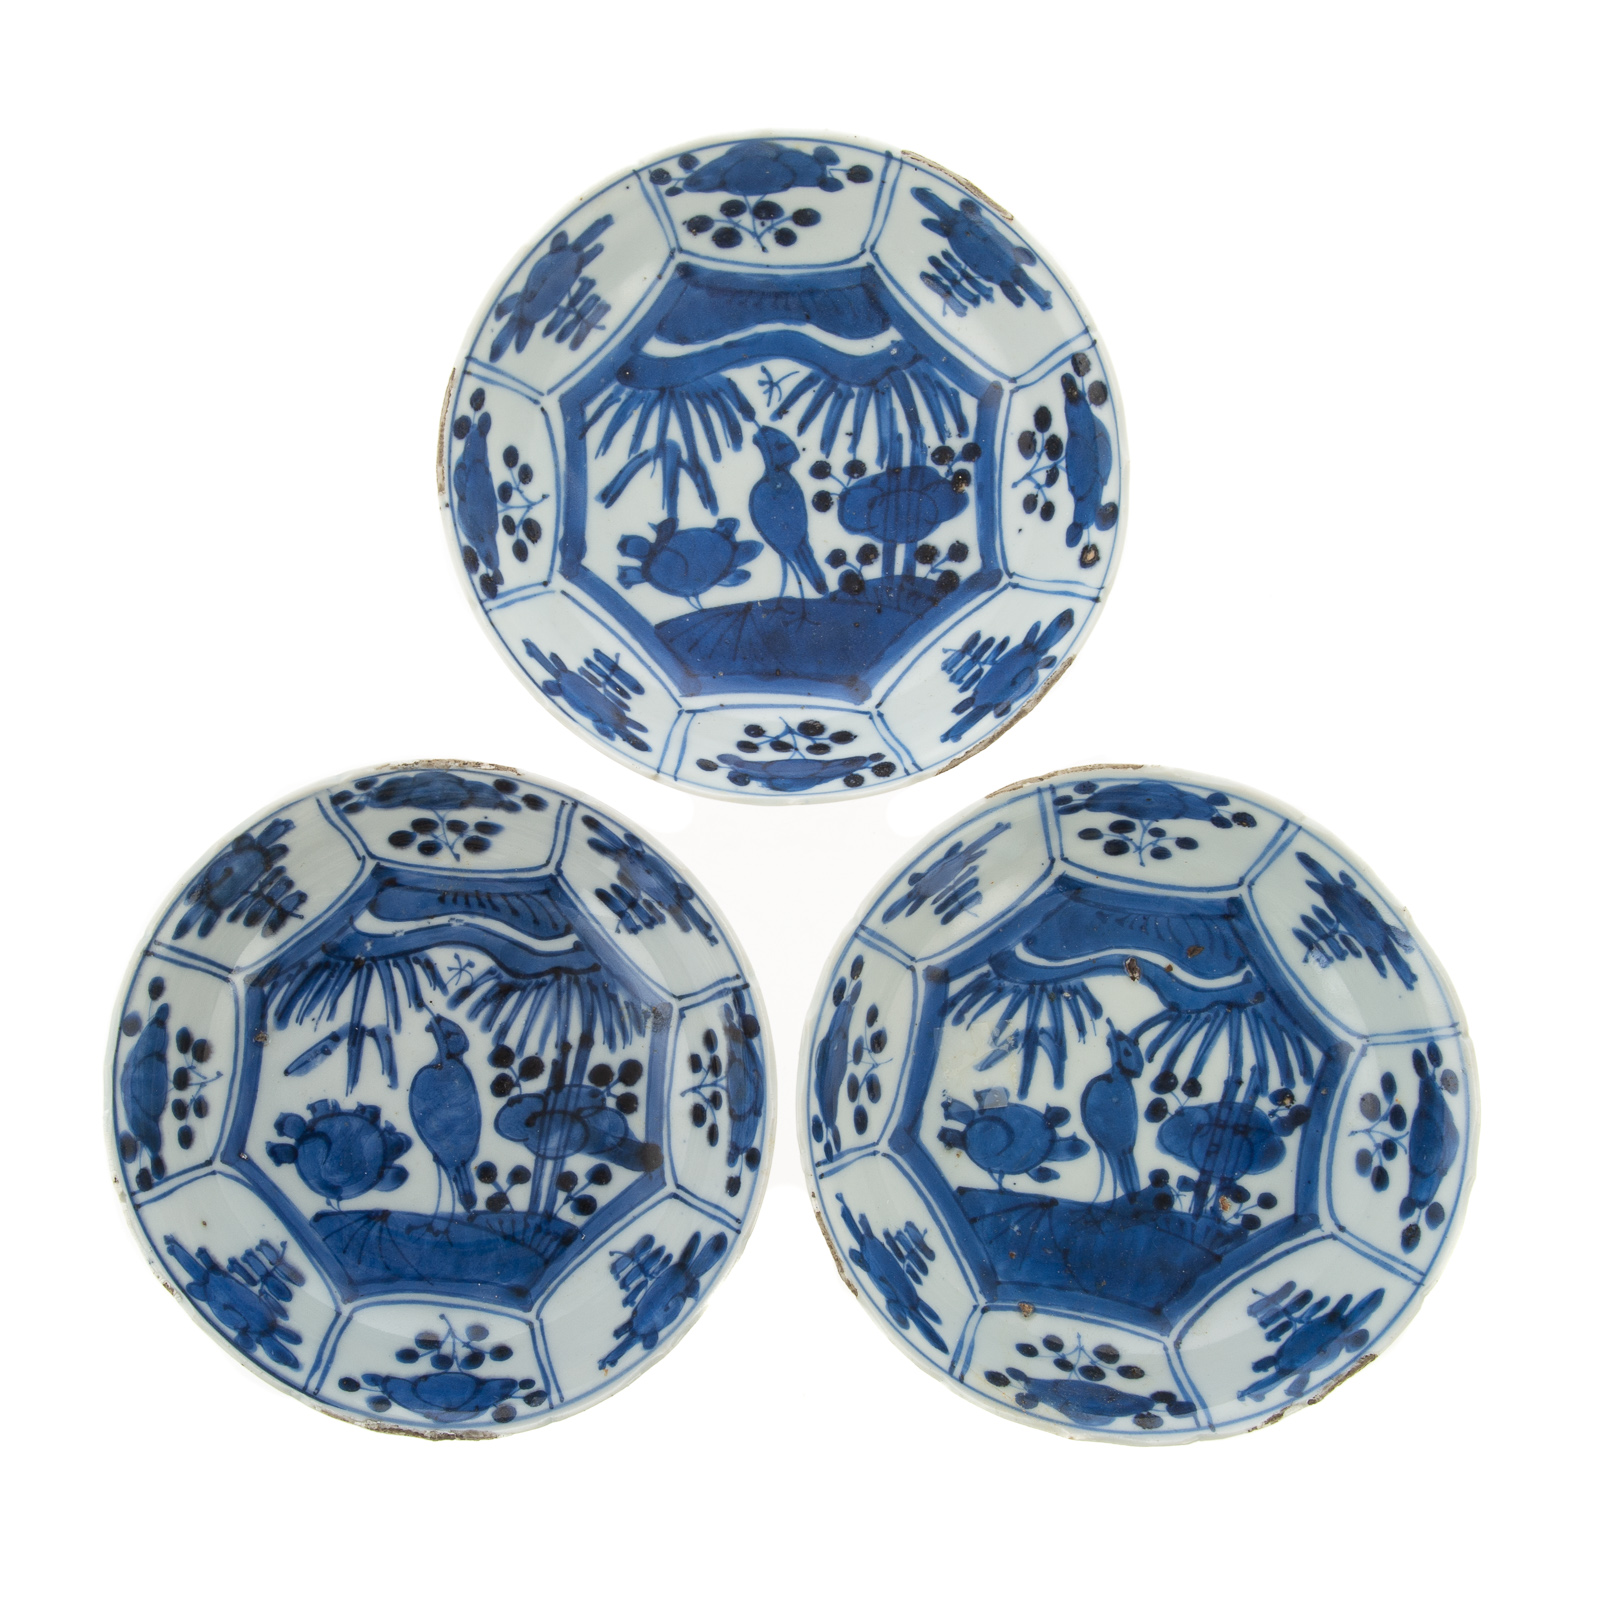 THREE CHINESE EXPORT KRAAK BOWLS 36a63d